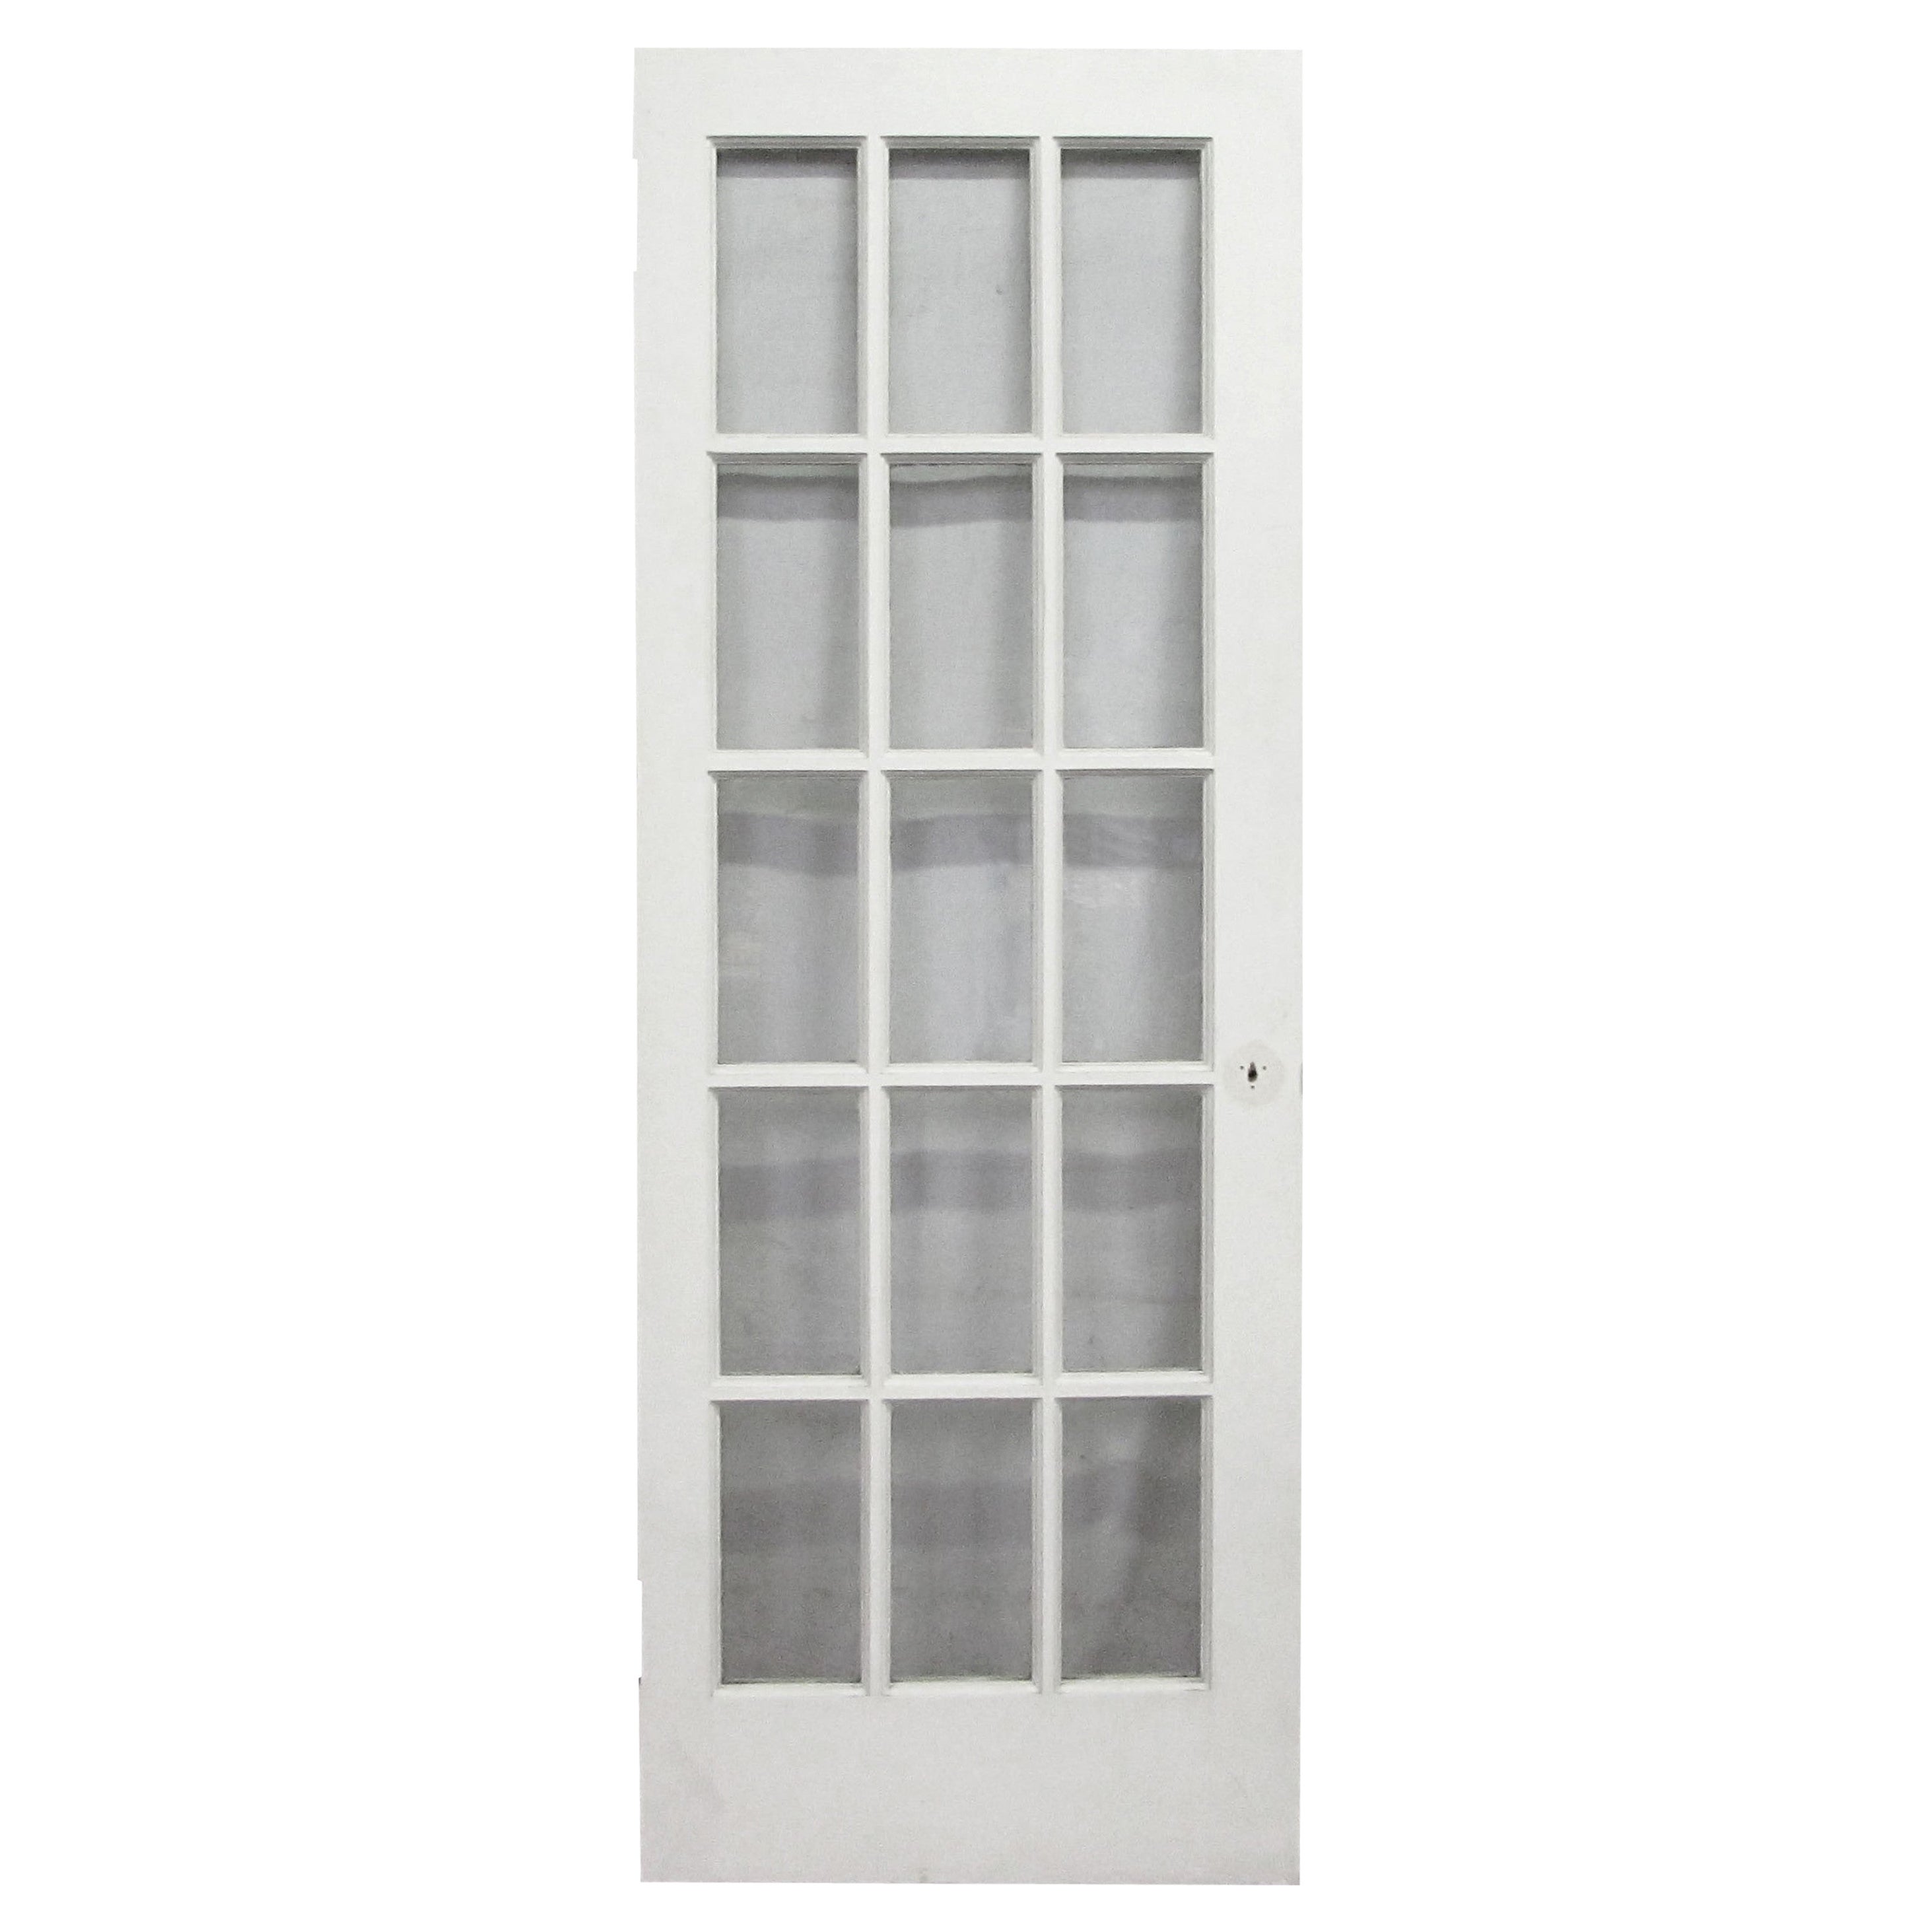 15 Glass Panel Wood French Door Painted White - 30 x 79.75